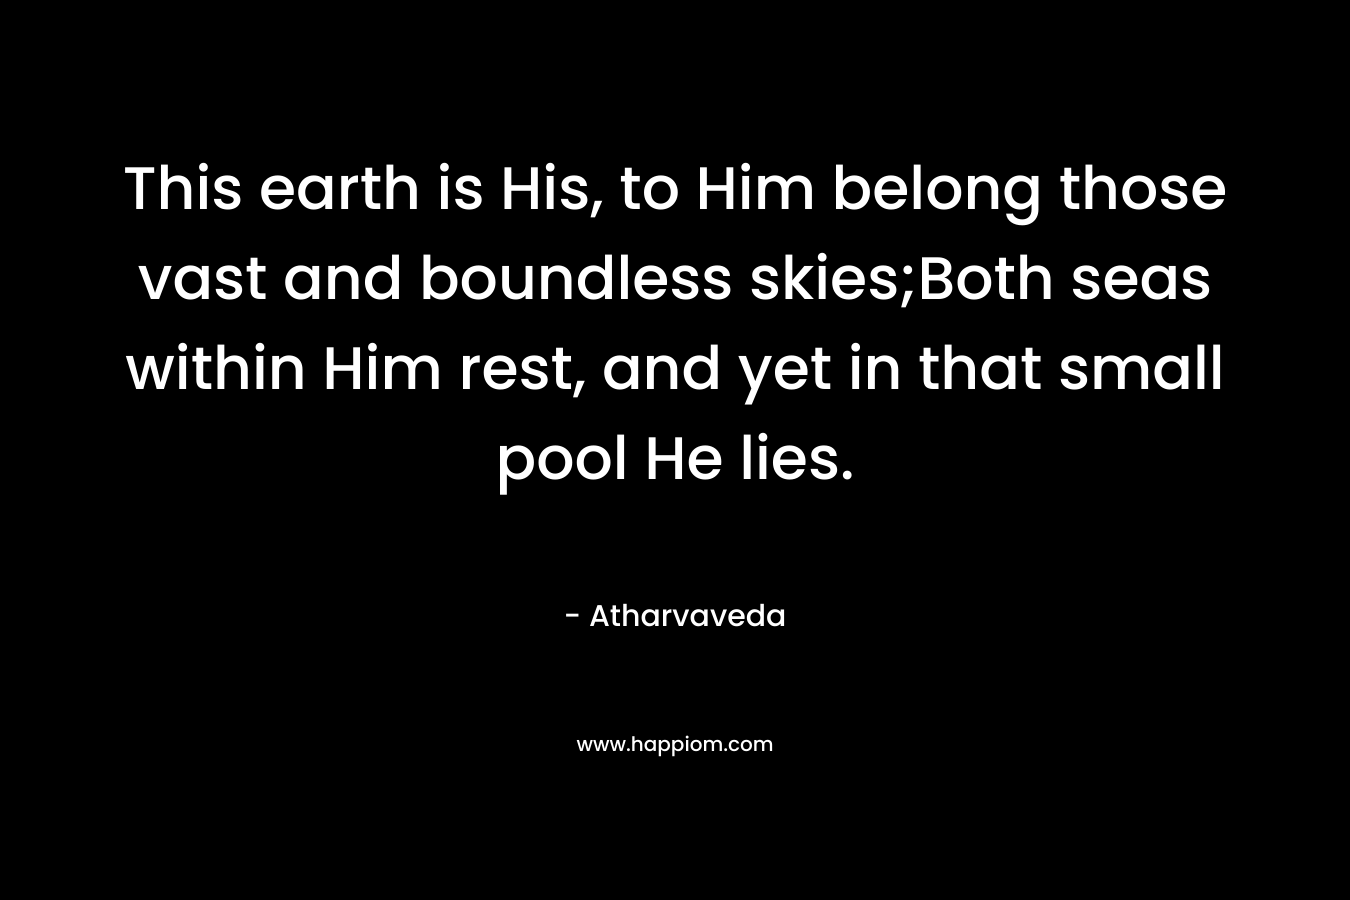 This earth is His, to Him belong those vast and boundless skies;Both seas within Him rest, and yet in that small pool He lies. – Atharvaveda